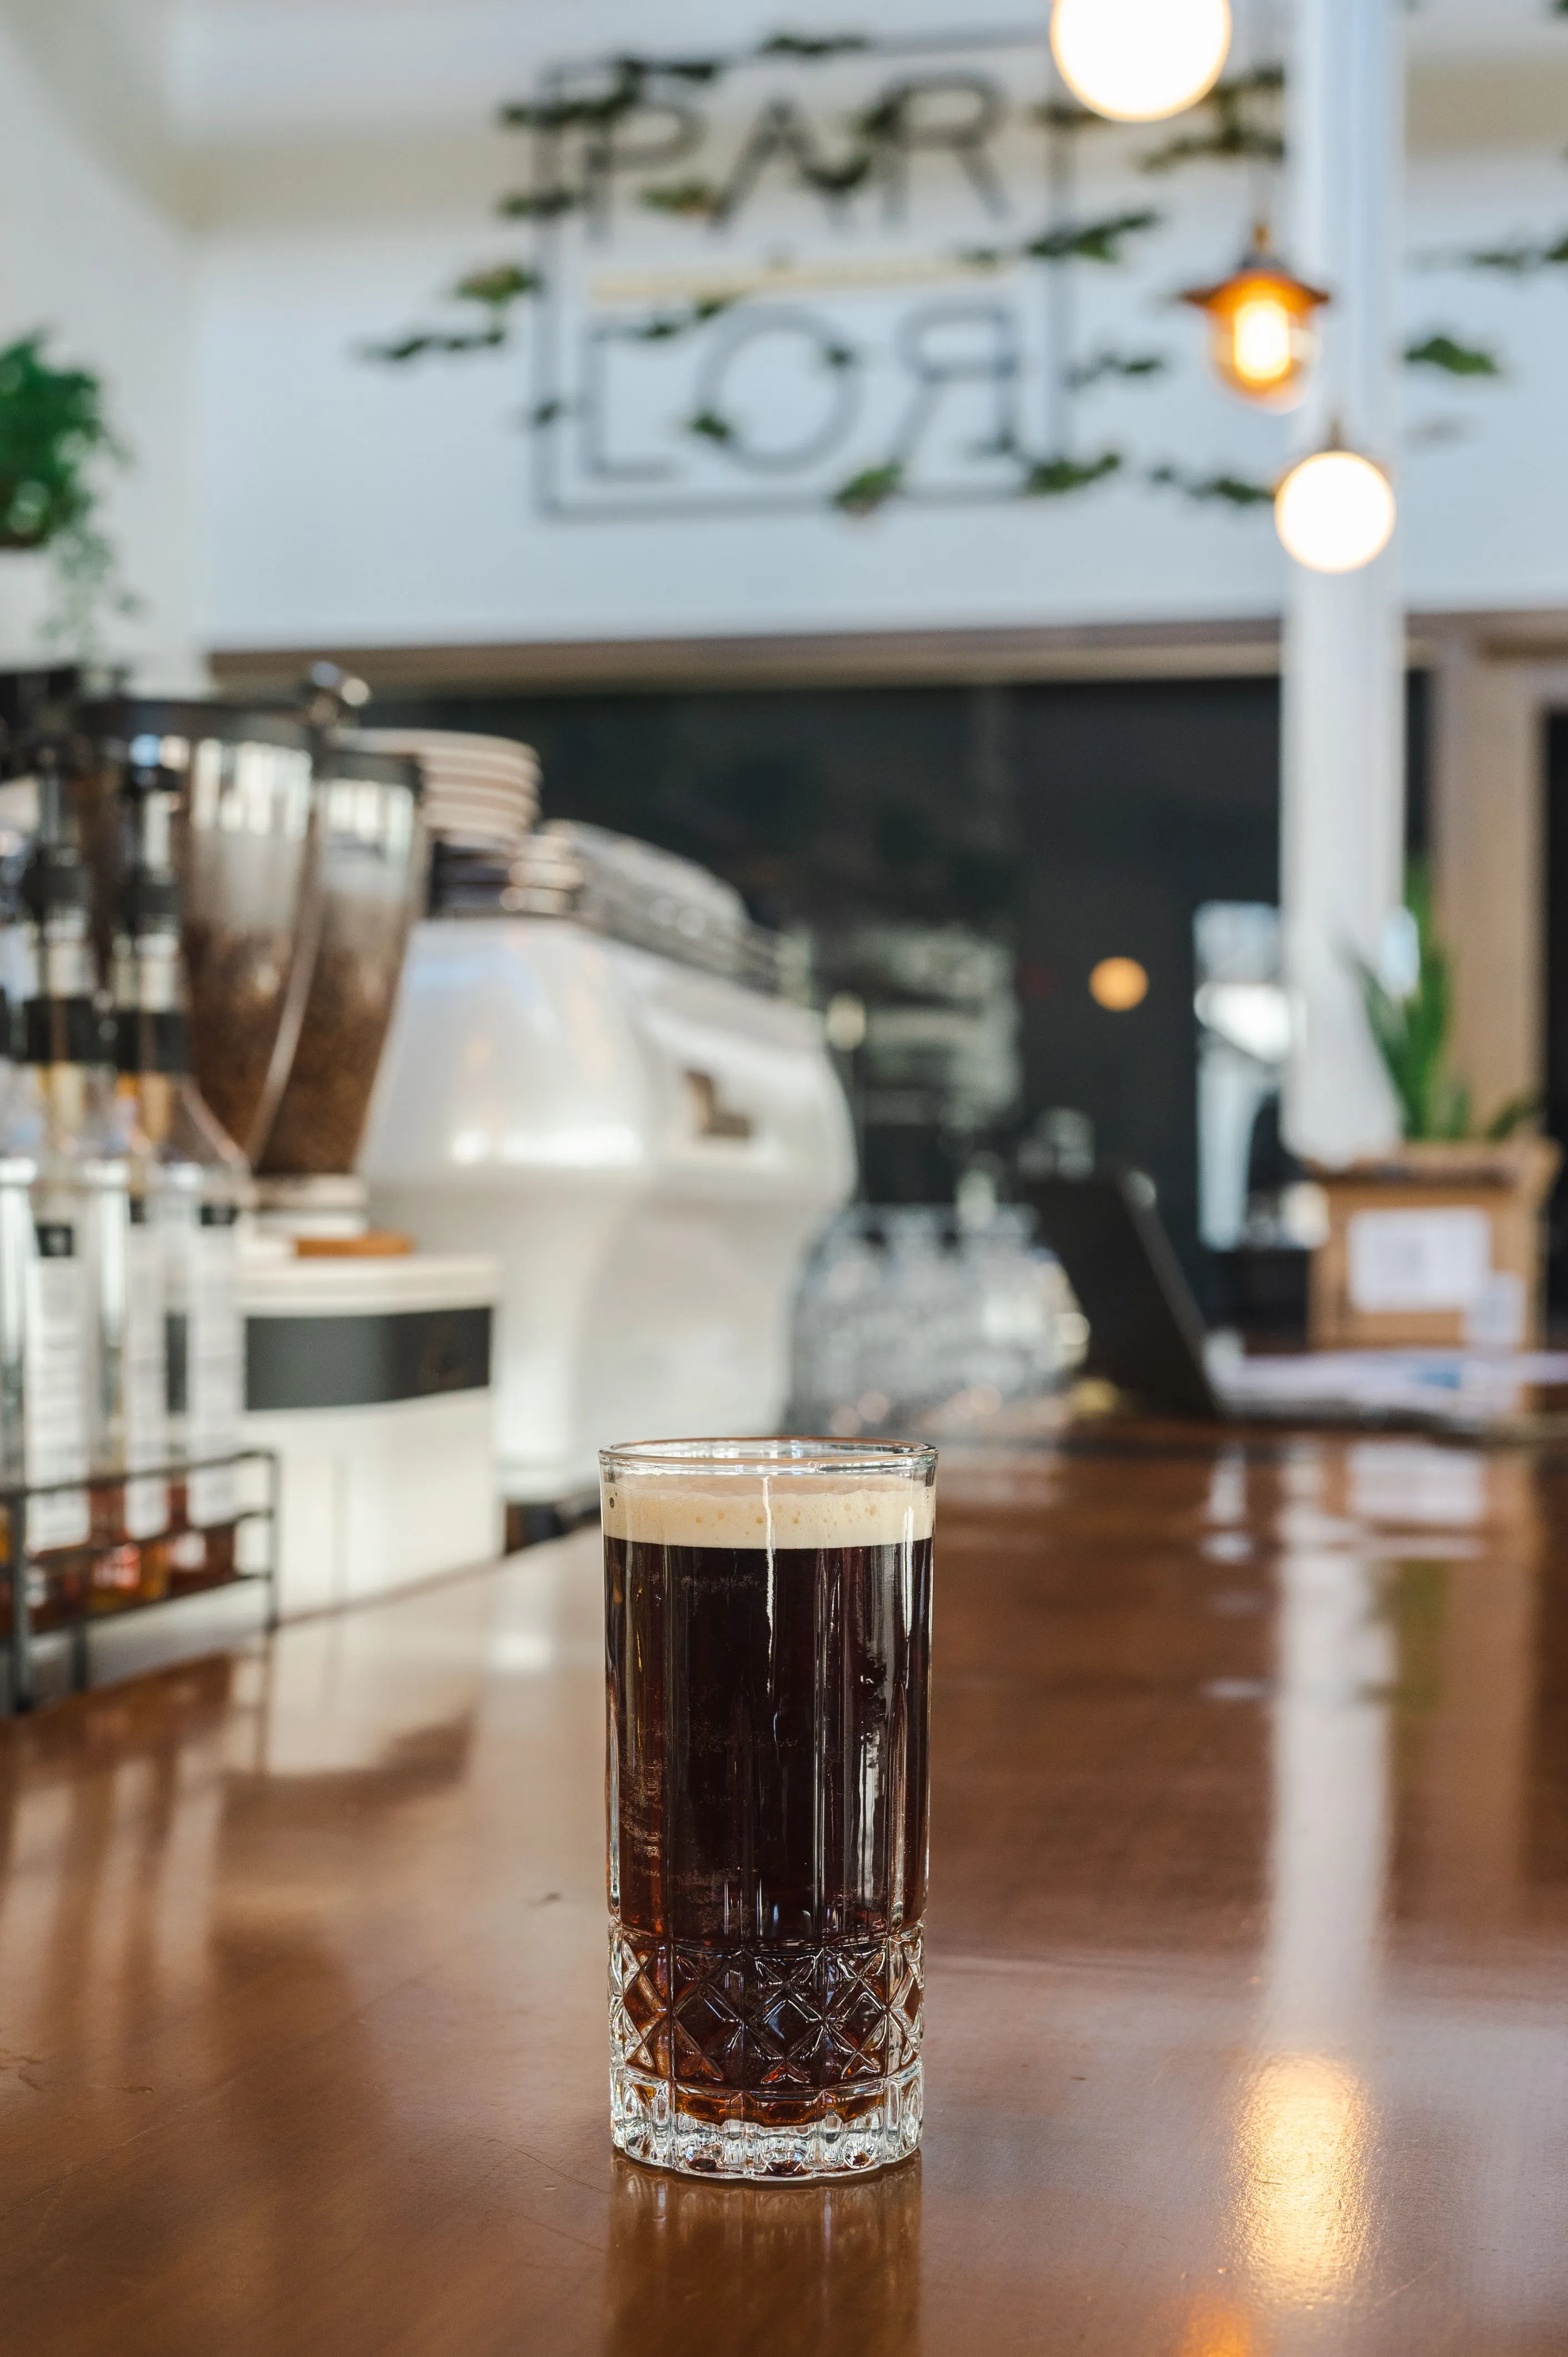 A cold brew coffee with a creamy foam on top, on a wooden counter in a cafe with blurred espresso machines and decor in the background.